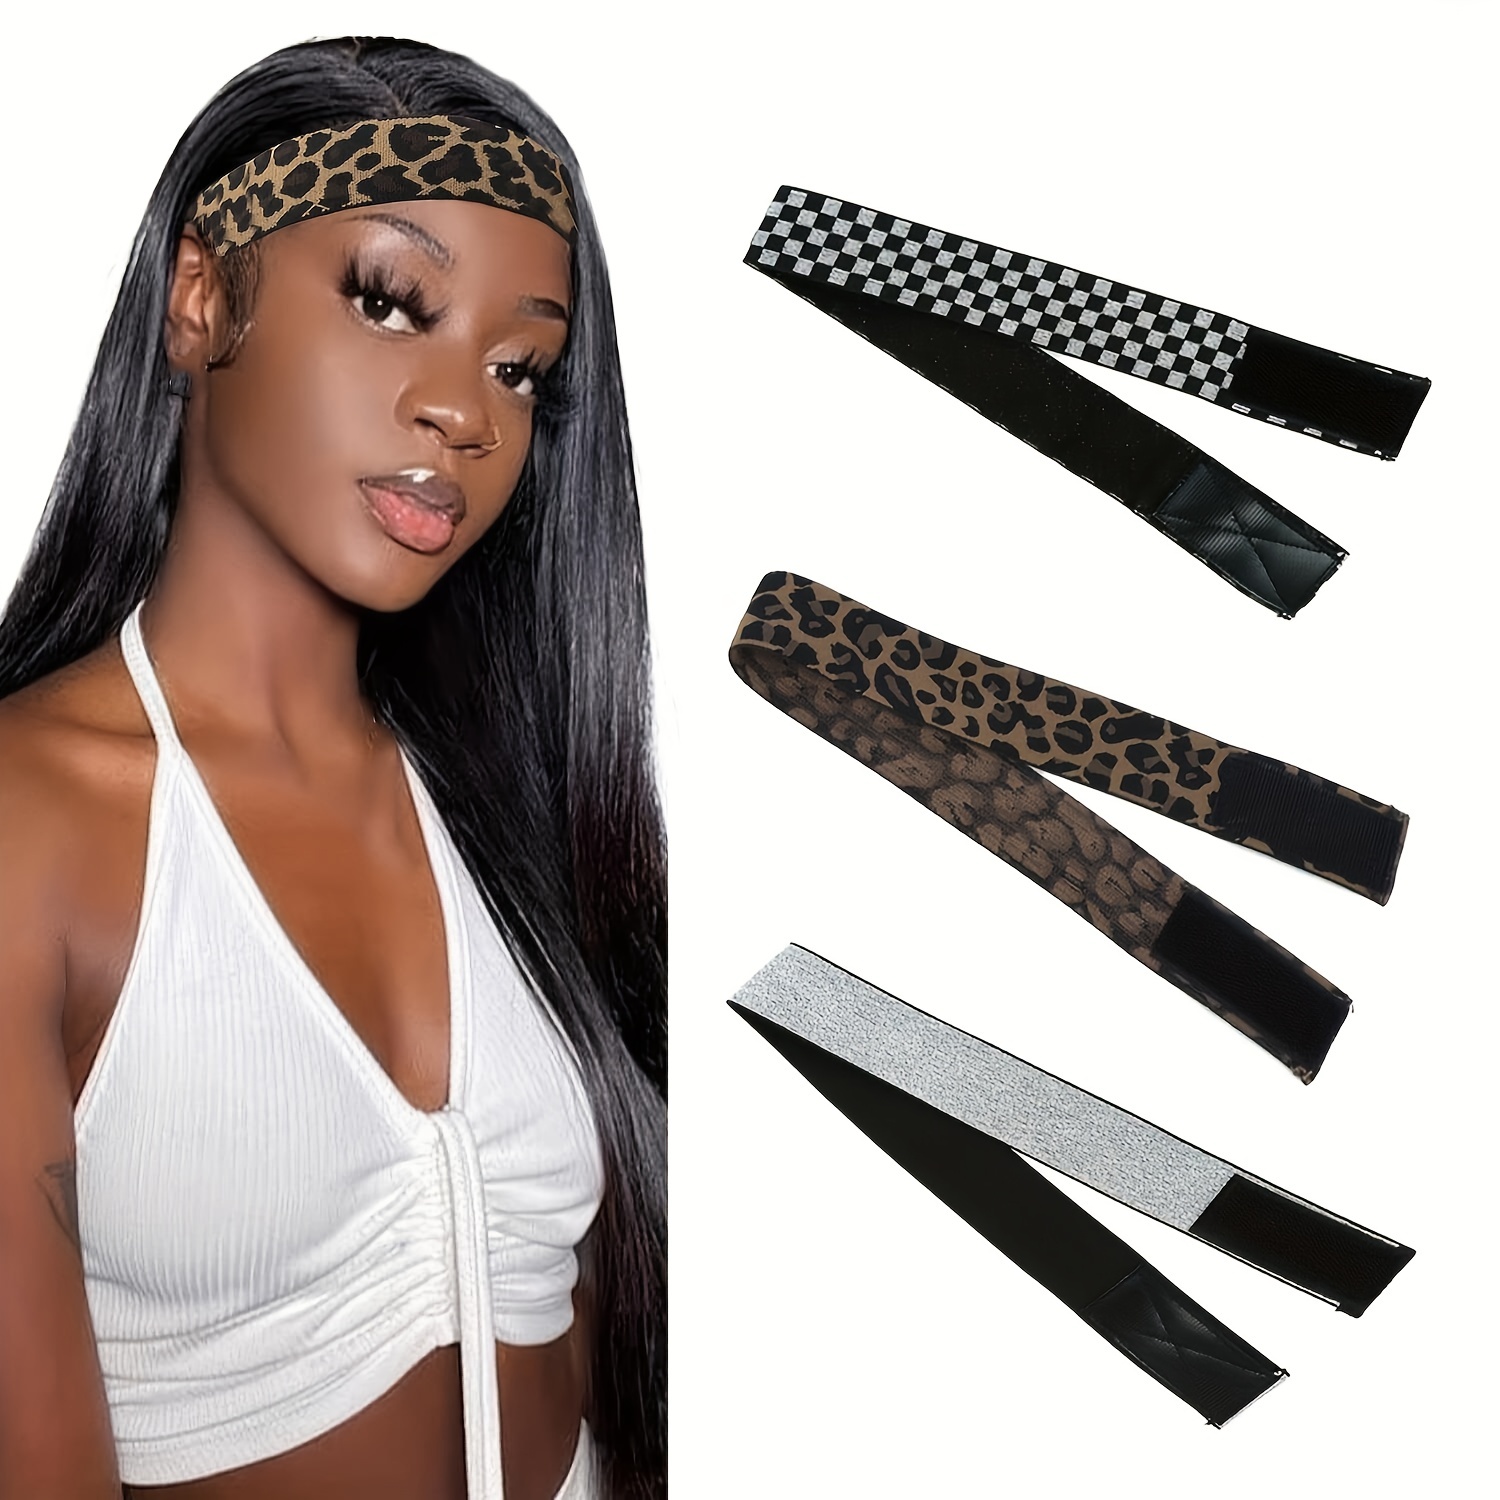 Leopard Print Lace Melting Band For Wigs Elastic Hair Bands - Temu